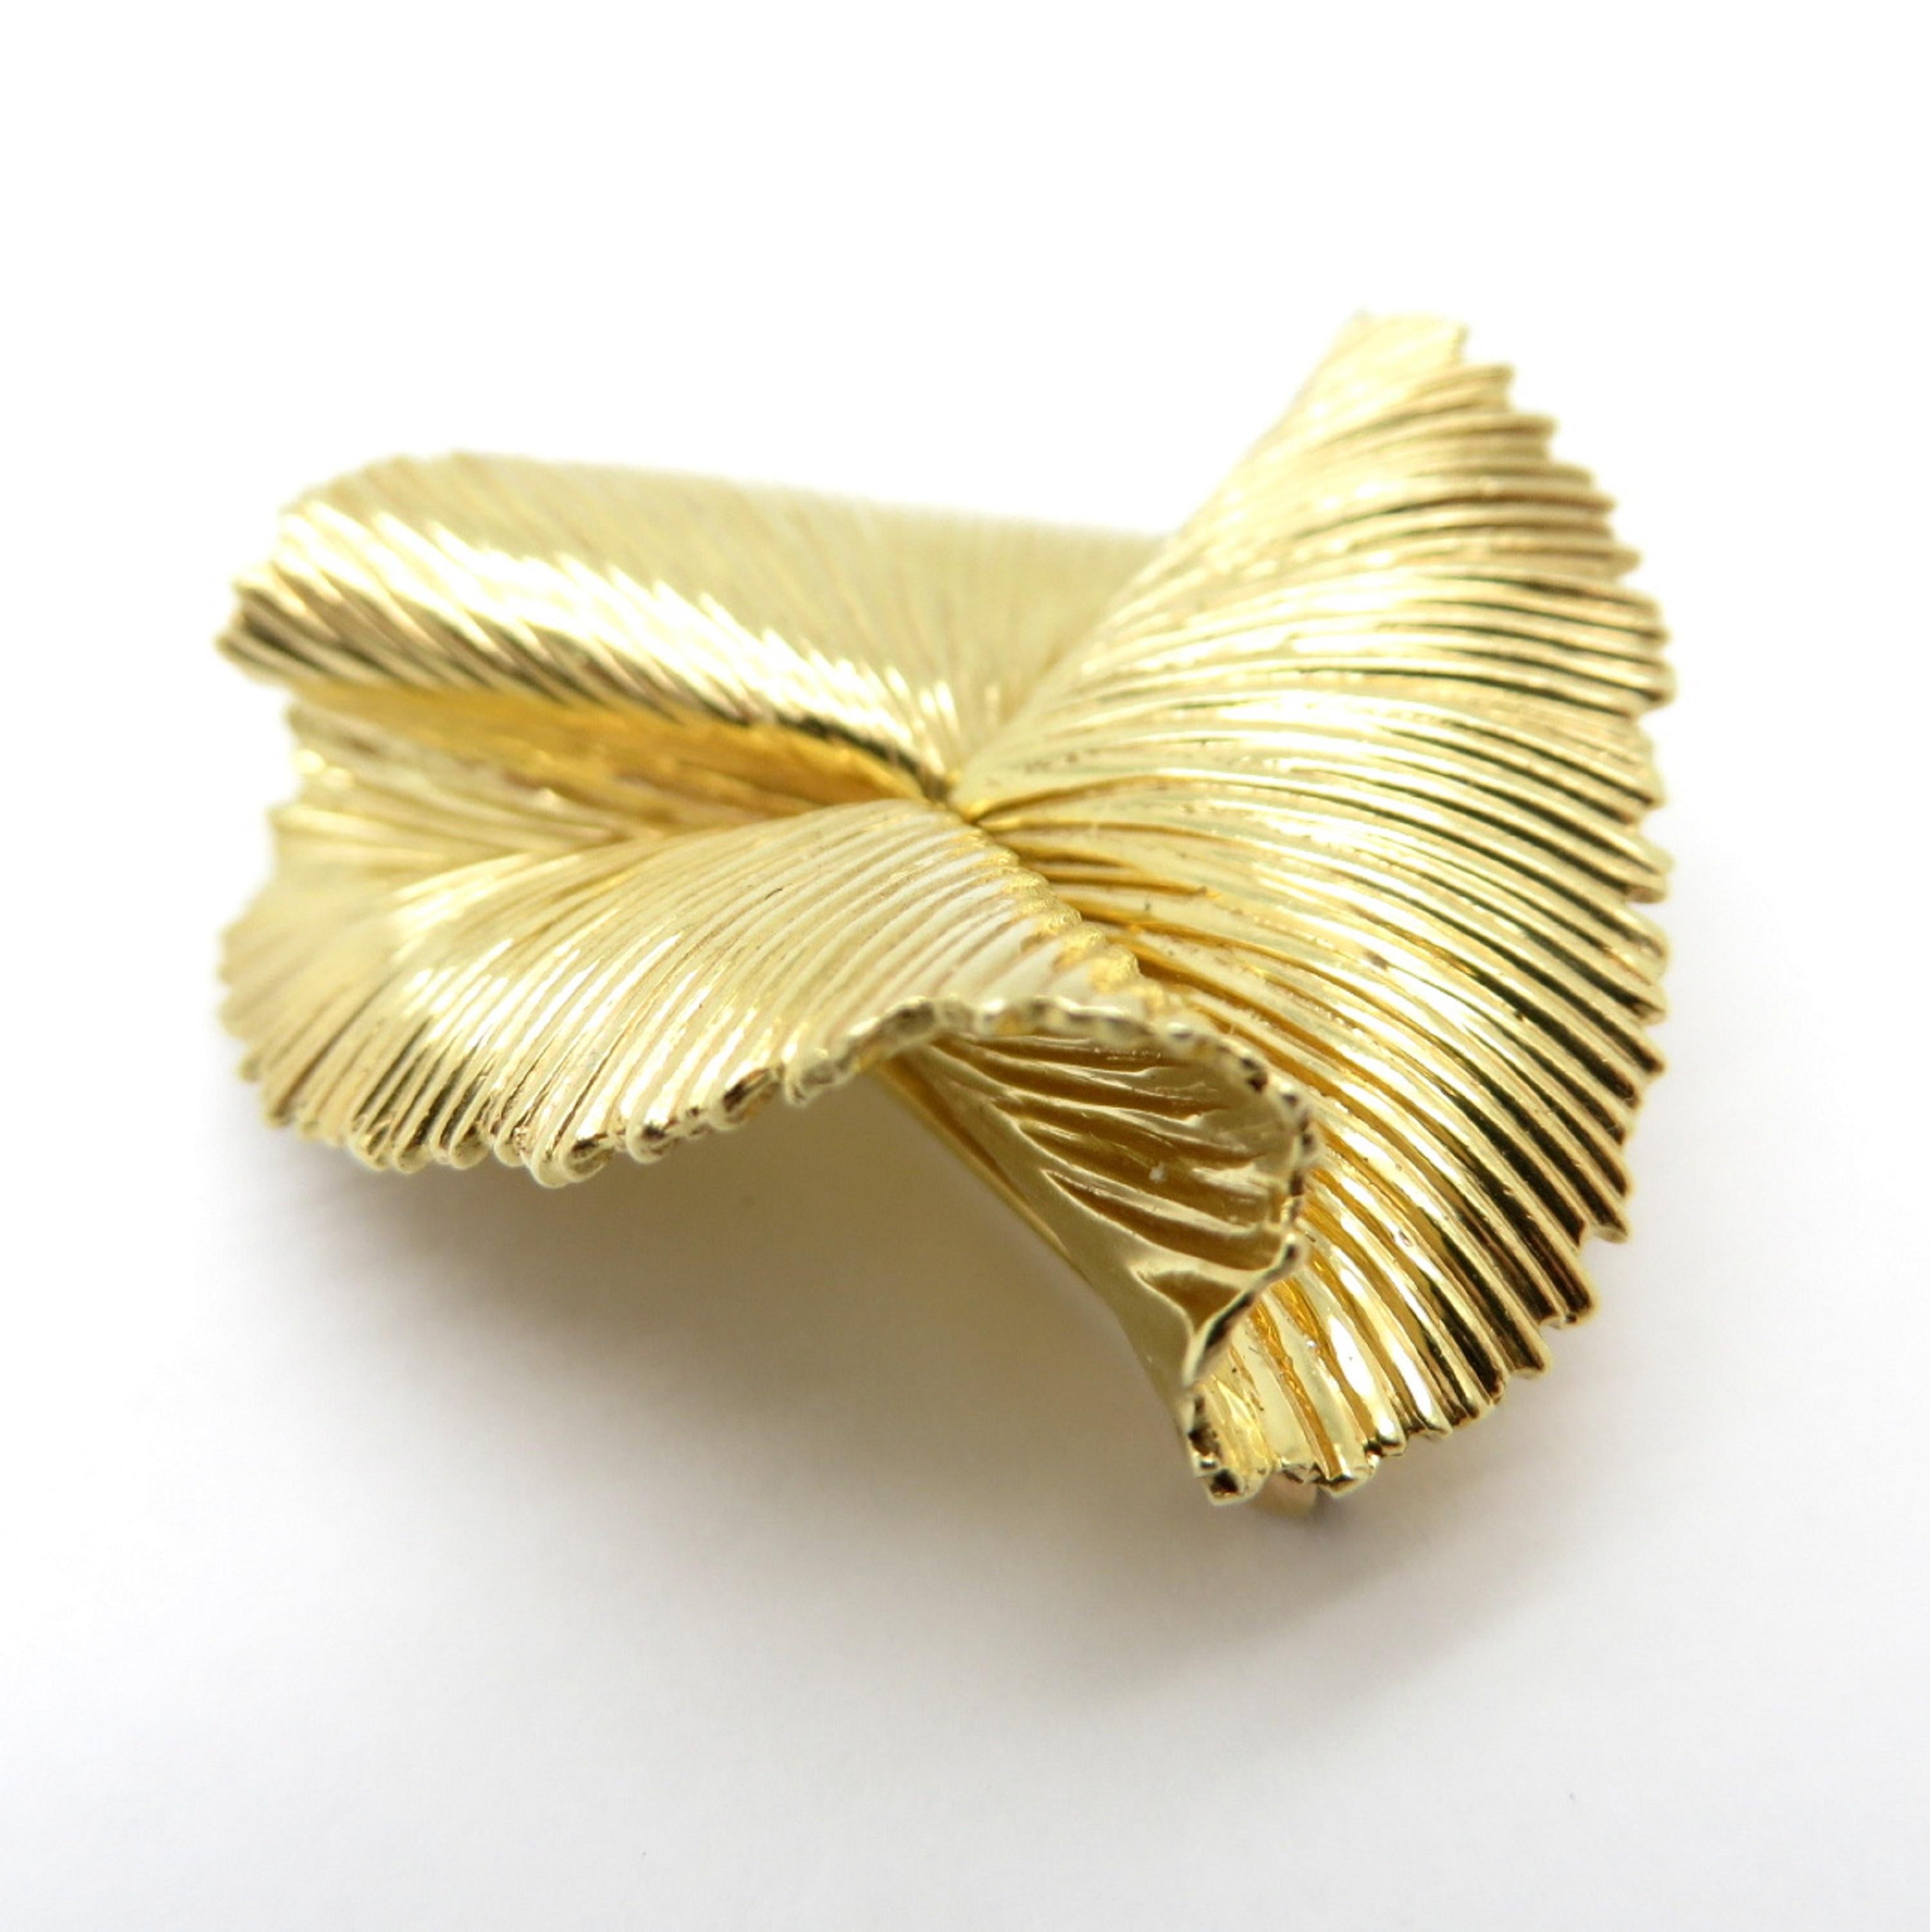 For sale is a designer estate Tiffany & Co. 14K Yellow Gold folded wire brooch!
It measures 1-3/8” inches wide.
The back side plate is hallmarked: 14kt Tiffany & Co.
True collector’s item, as this item is no longer in production.
The total net